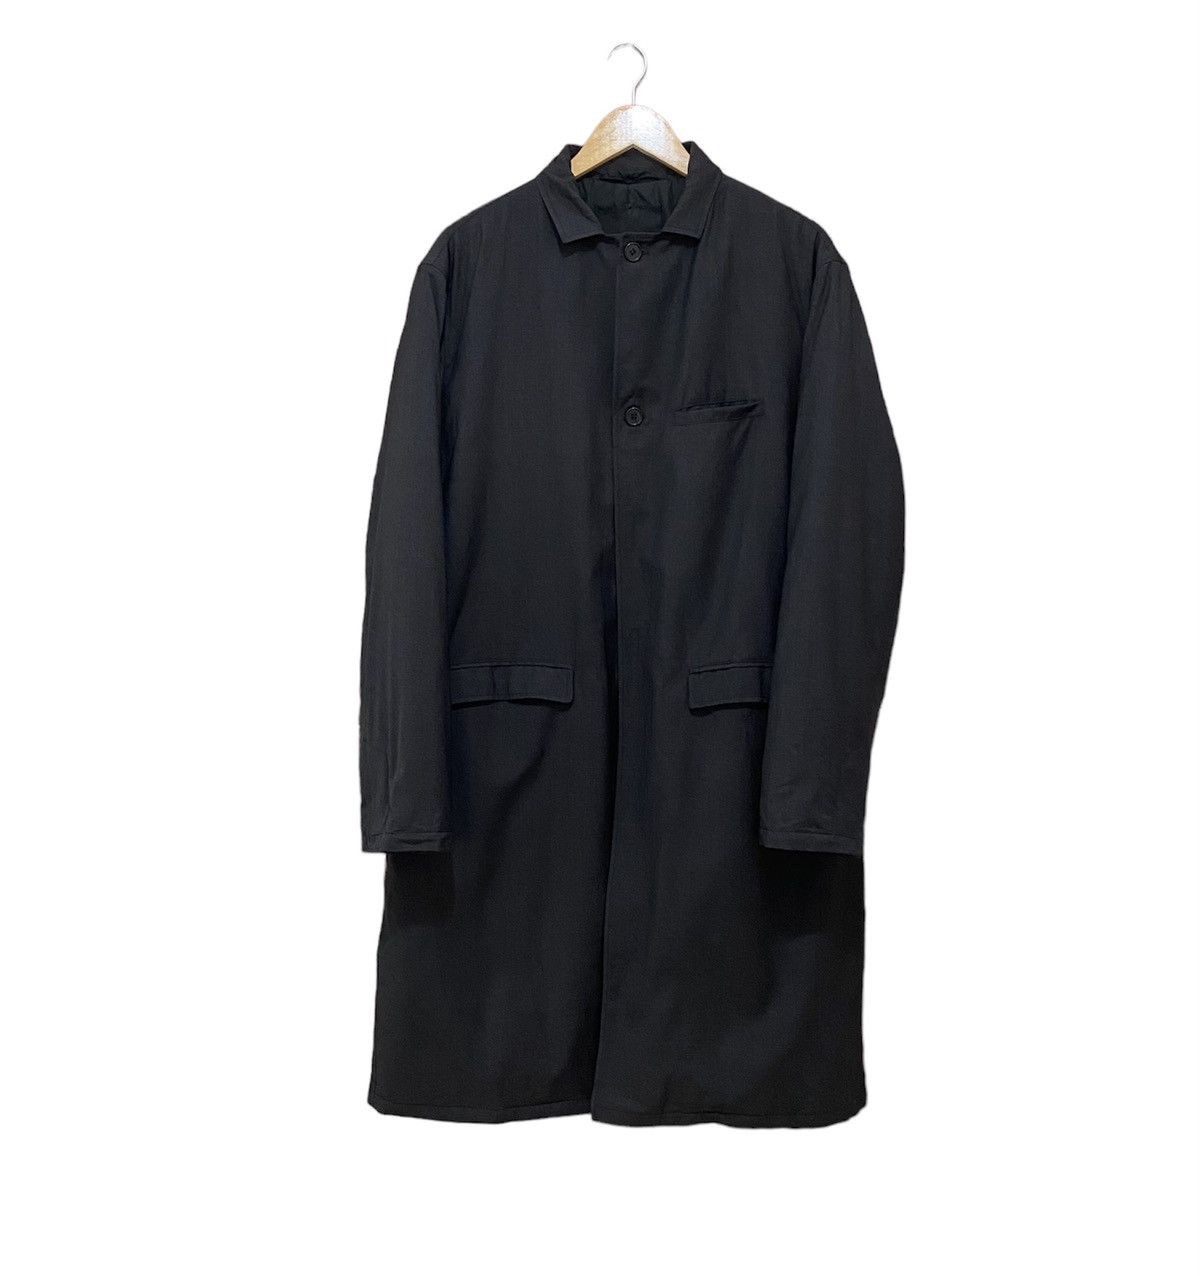 Prada Trench Coat Wool Padded Jacket Perfect Condition - 1